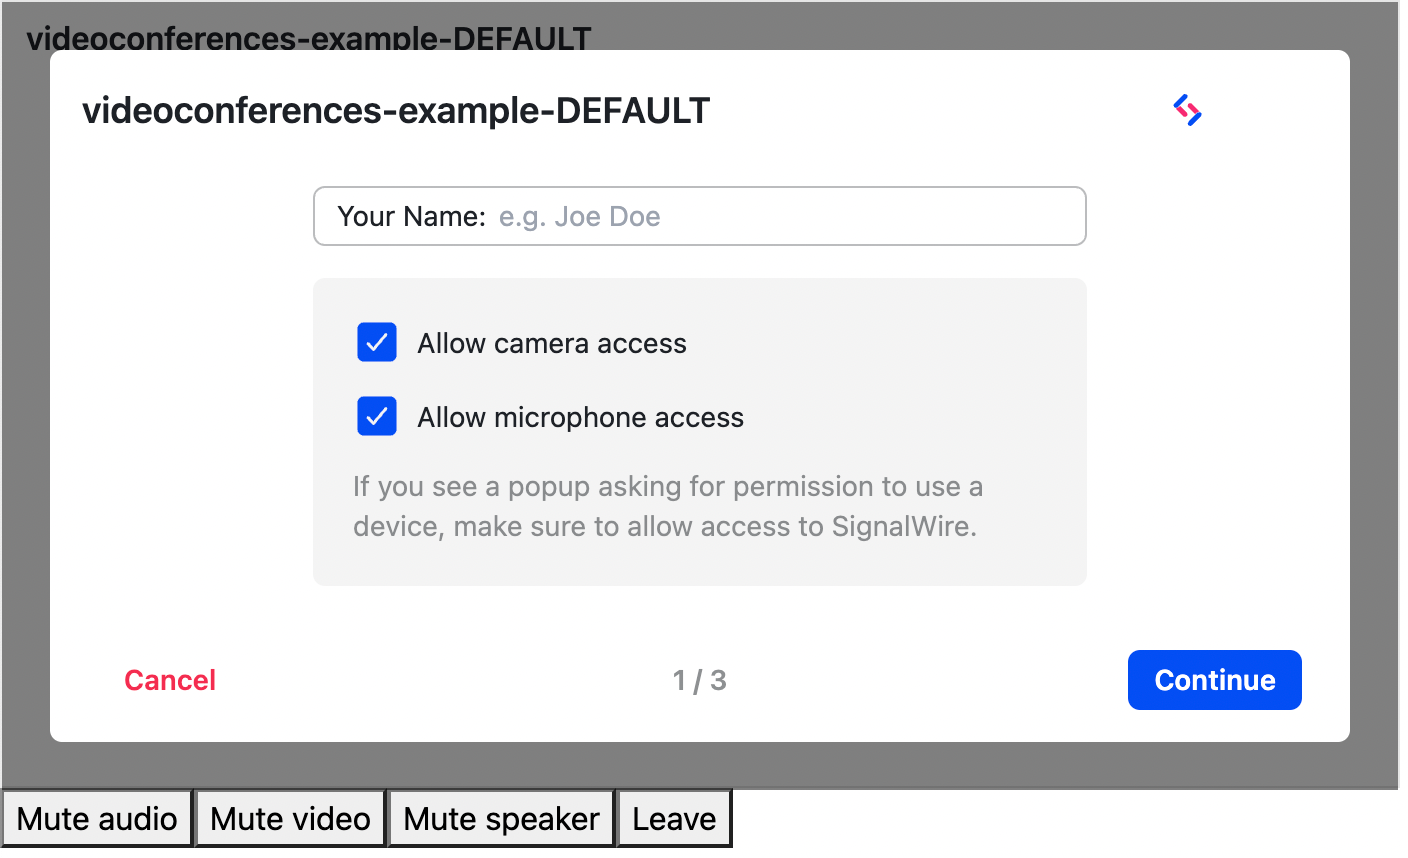 A screenshot of the control buttons used for the user to mute or unmute audio, video, and speaker.